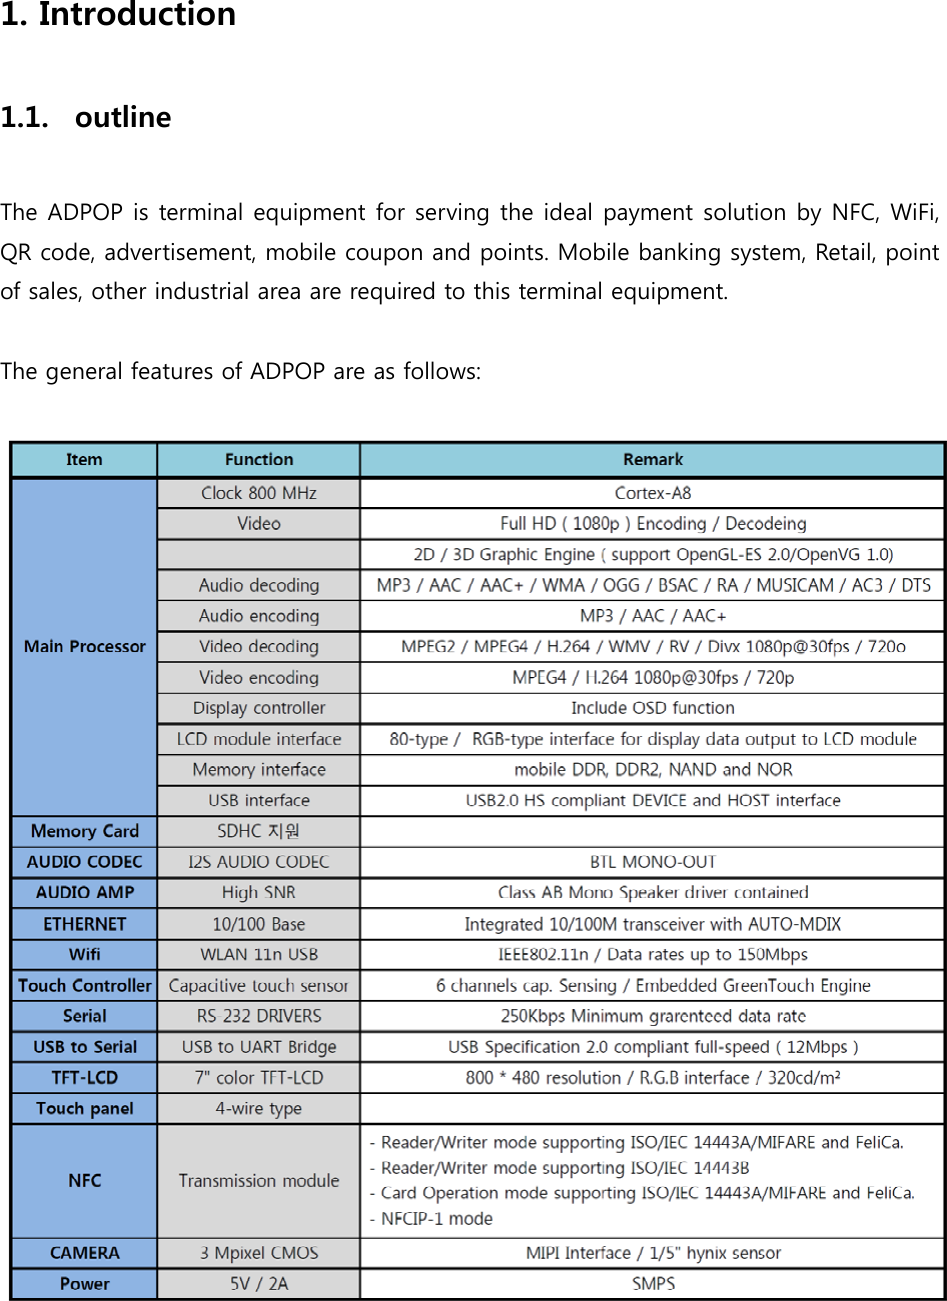   1. Introduction    1.1. outline  The ADPOP is terminal equipment for serving the ideal payment solution by NFC, WiFi, QR code, advertisement, mobile coupon and points. Mobile banking system, Retail, point of sales, other industrial area are required to this terminal equipment.  The general features of ADPOP are as follows:  